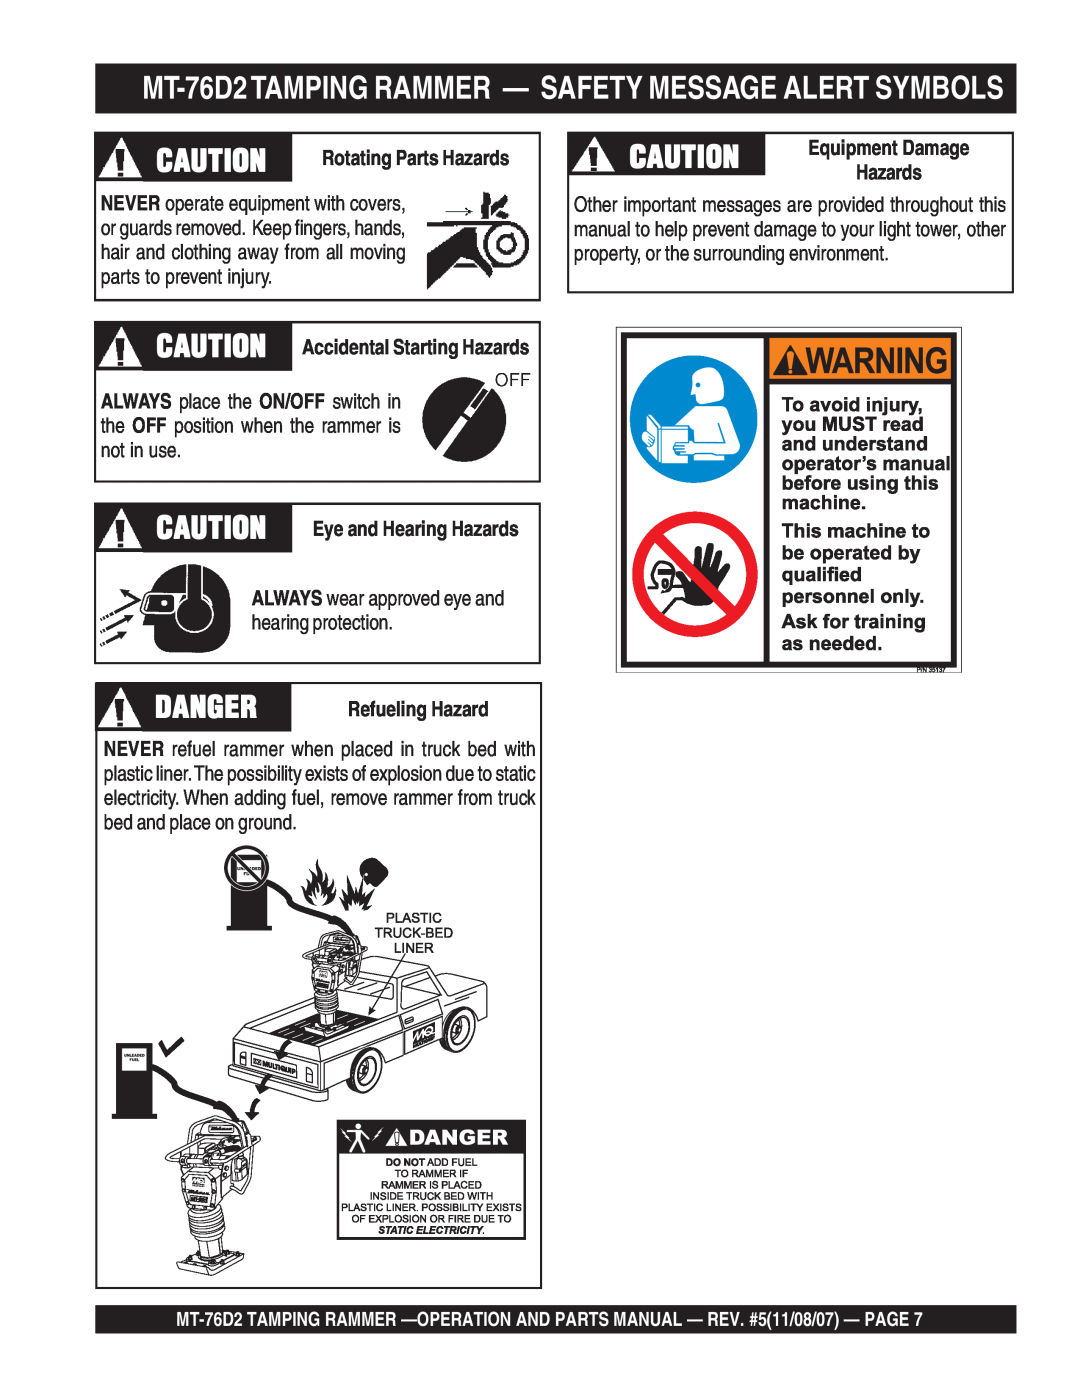 Multiquip manual MT-76D2TAMPING RAMMER - SAFETY MESSAGE ALERT SYMBOLS, CAUTION Eye and Hearing Hazards, Equipment Damage 